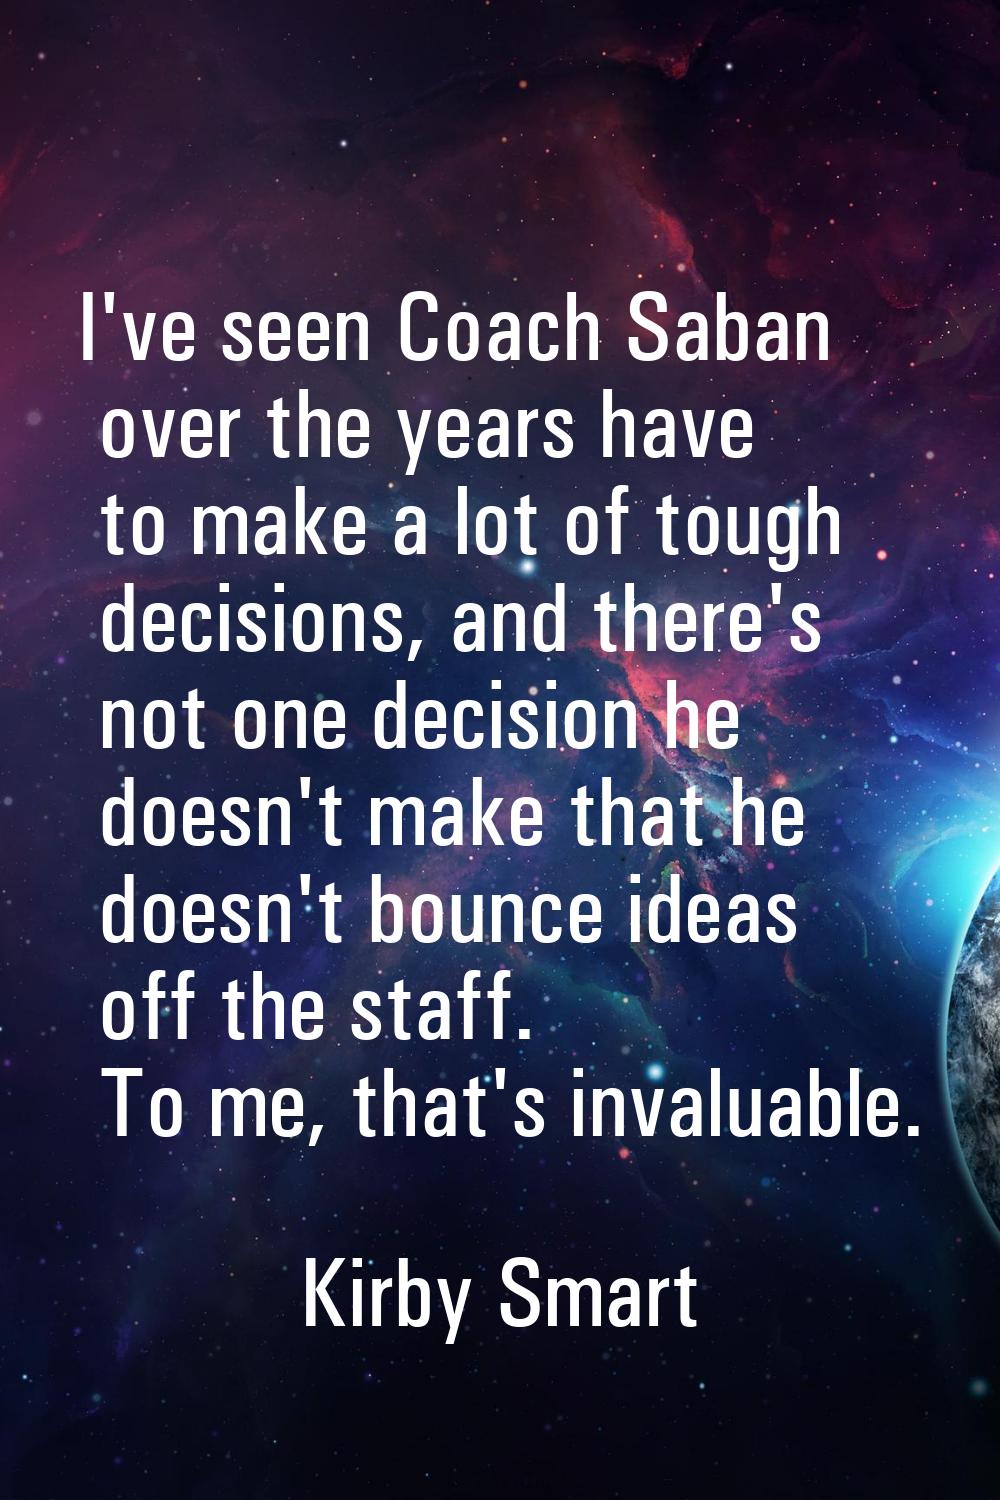 I've seen Coach Saban over the years have to make a lot of tough decisions, and there's not one dec